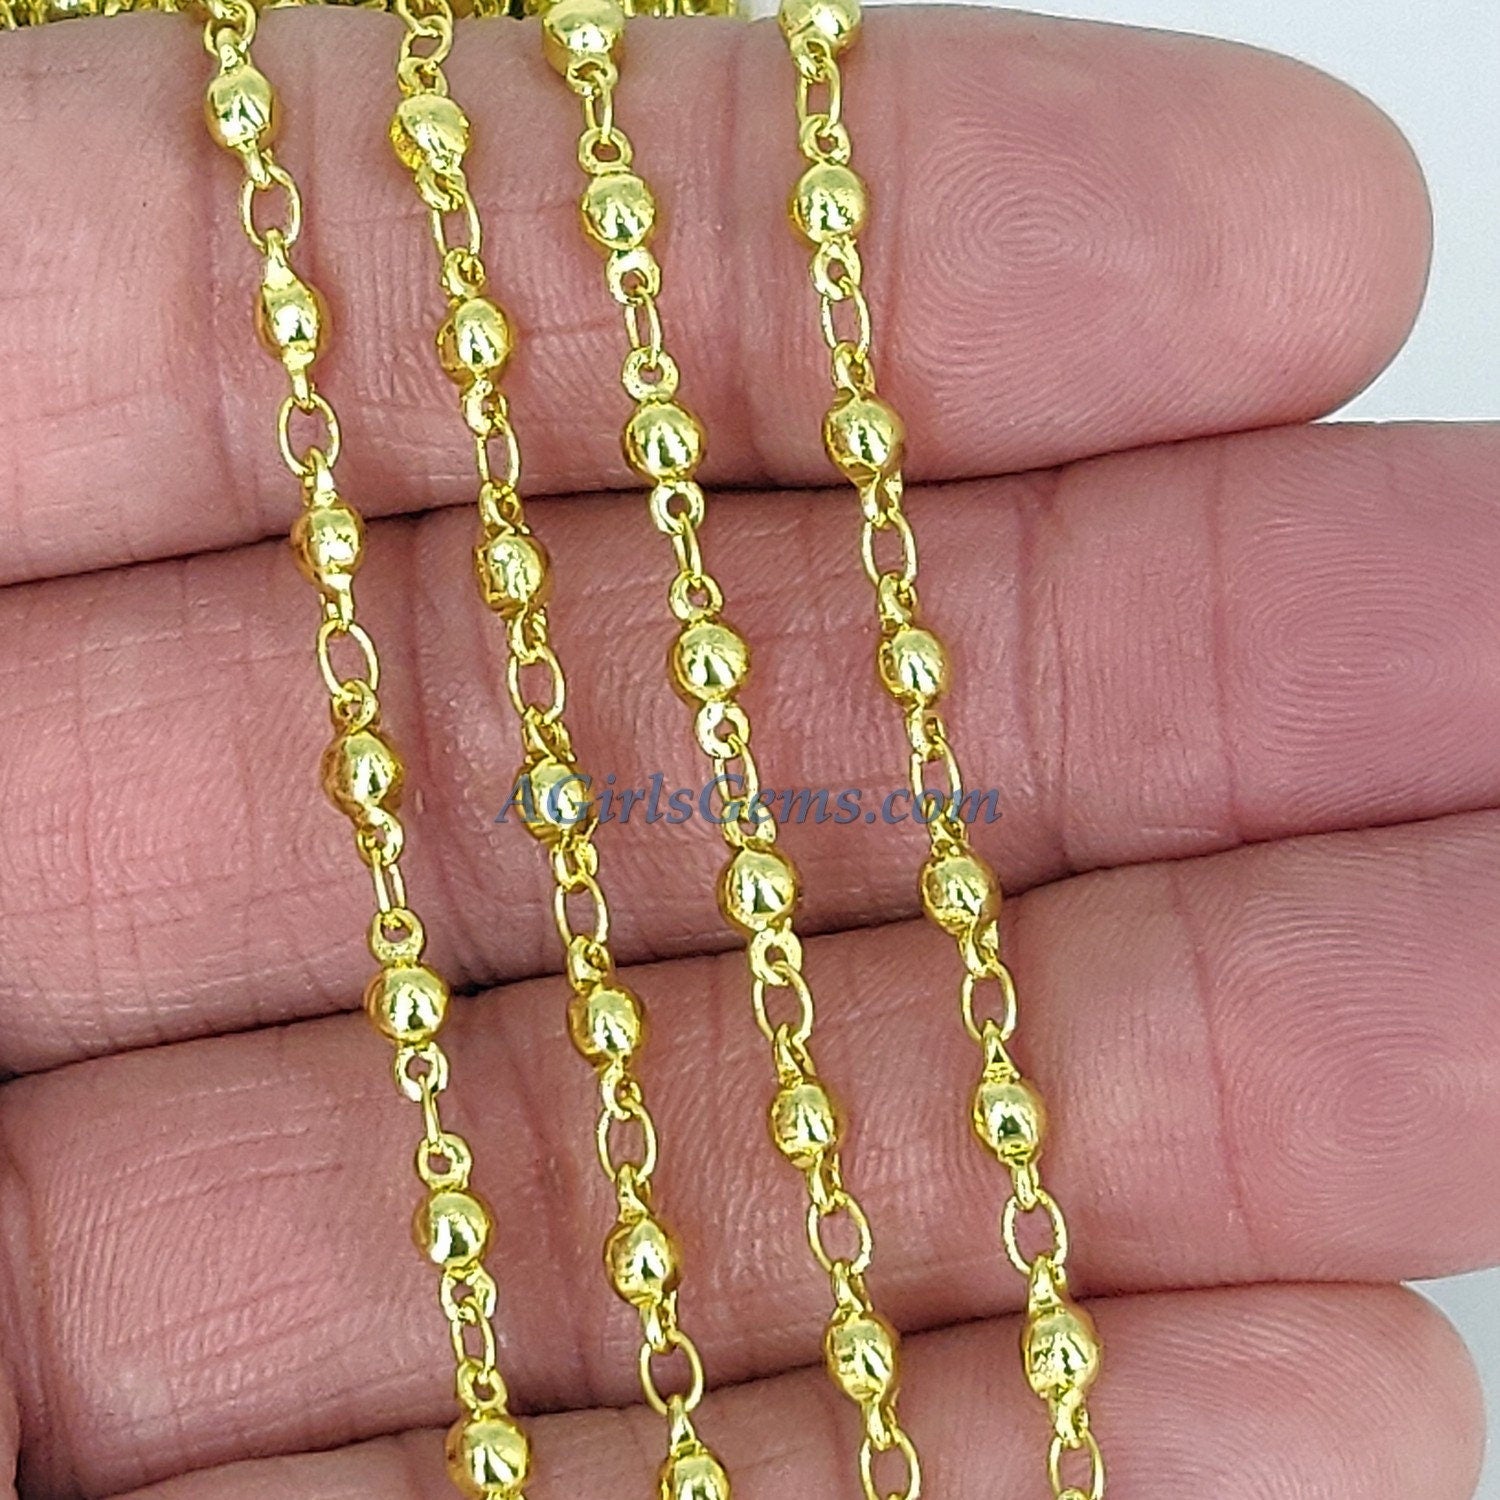 Gold Beaded Rosary Chain, Religious Chain for Jewelry, Dainty Round Metal Beads Satellite Style Boho